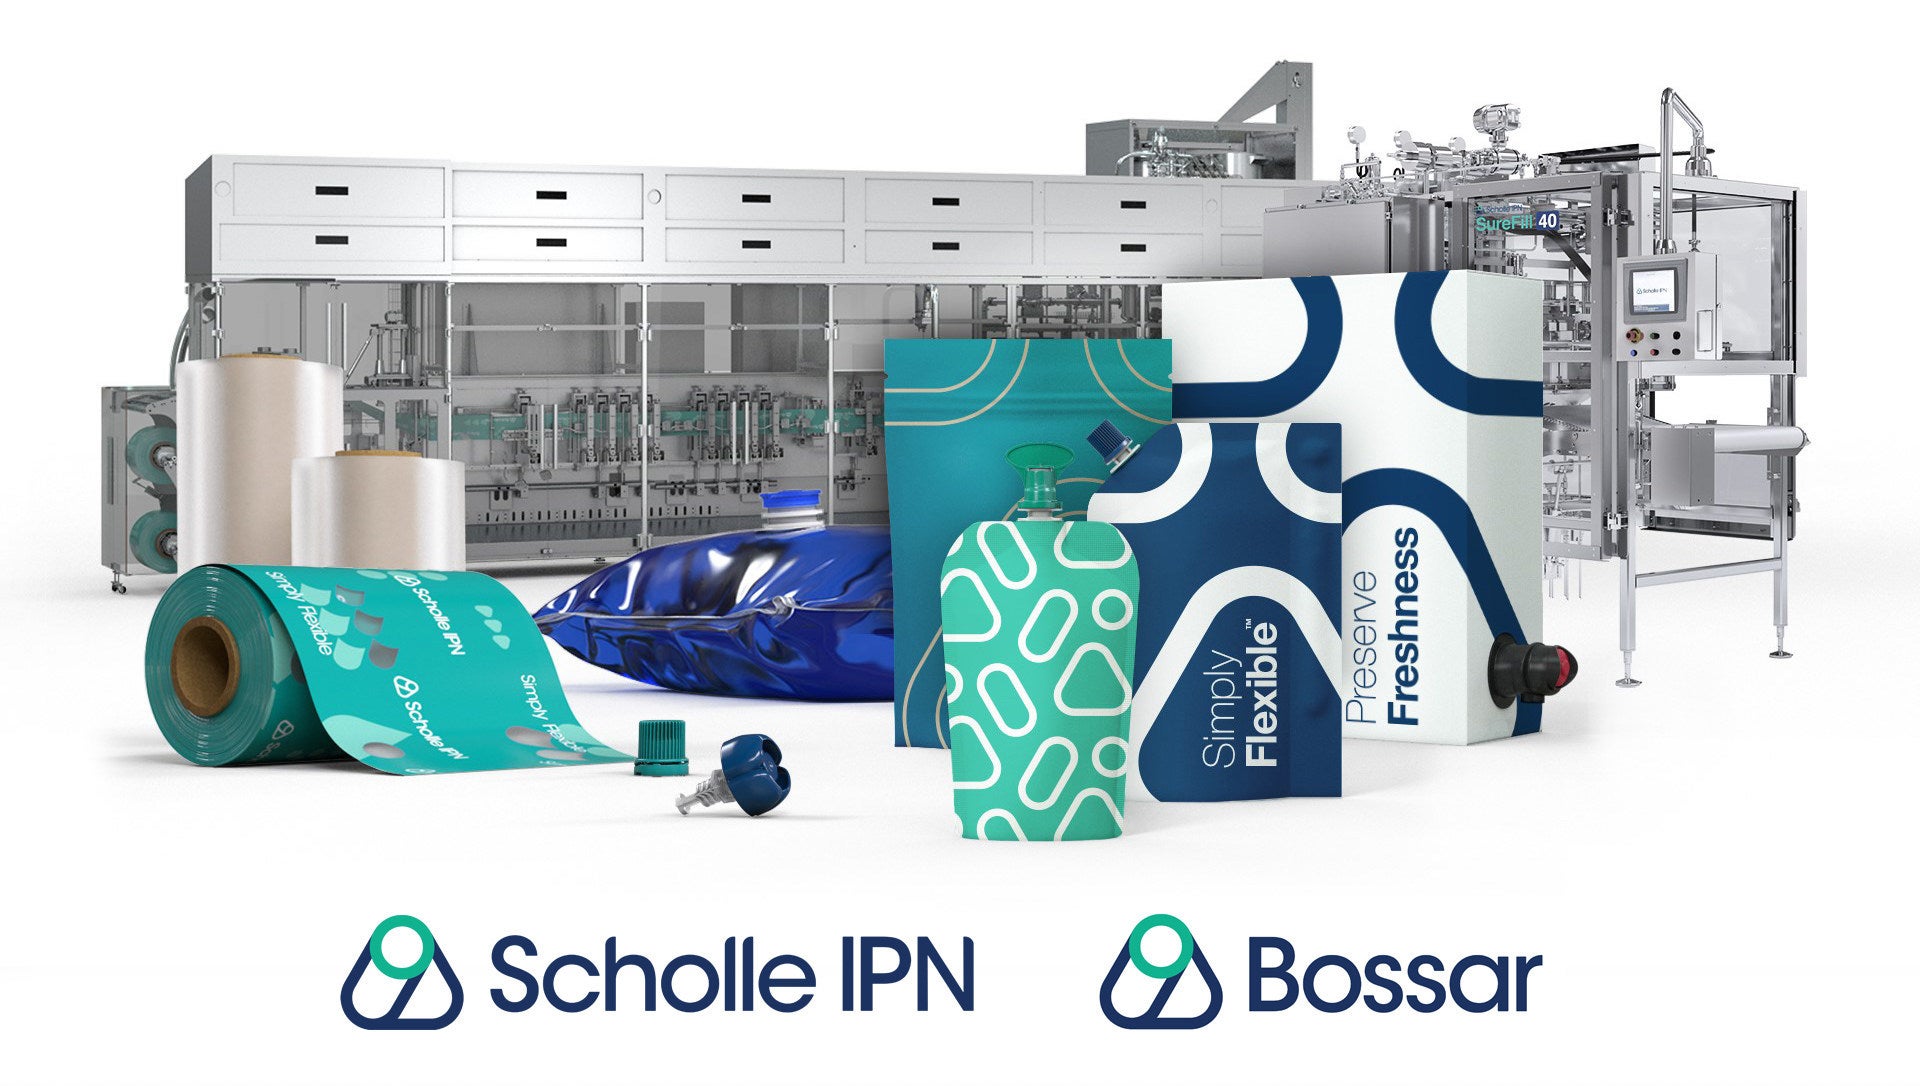 Scholle IPN completes acquisition of packaging firm Bossar